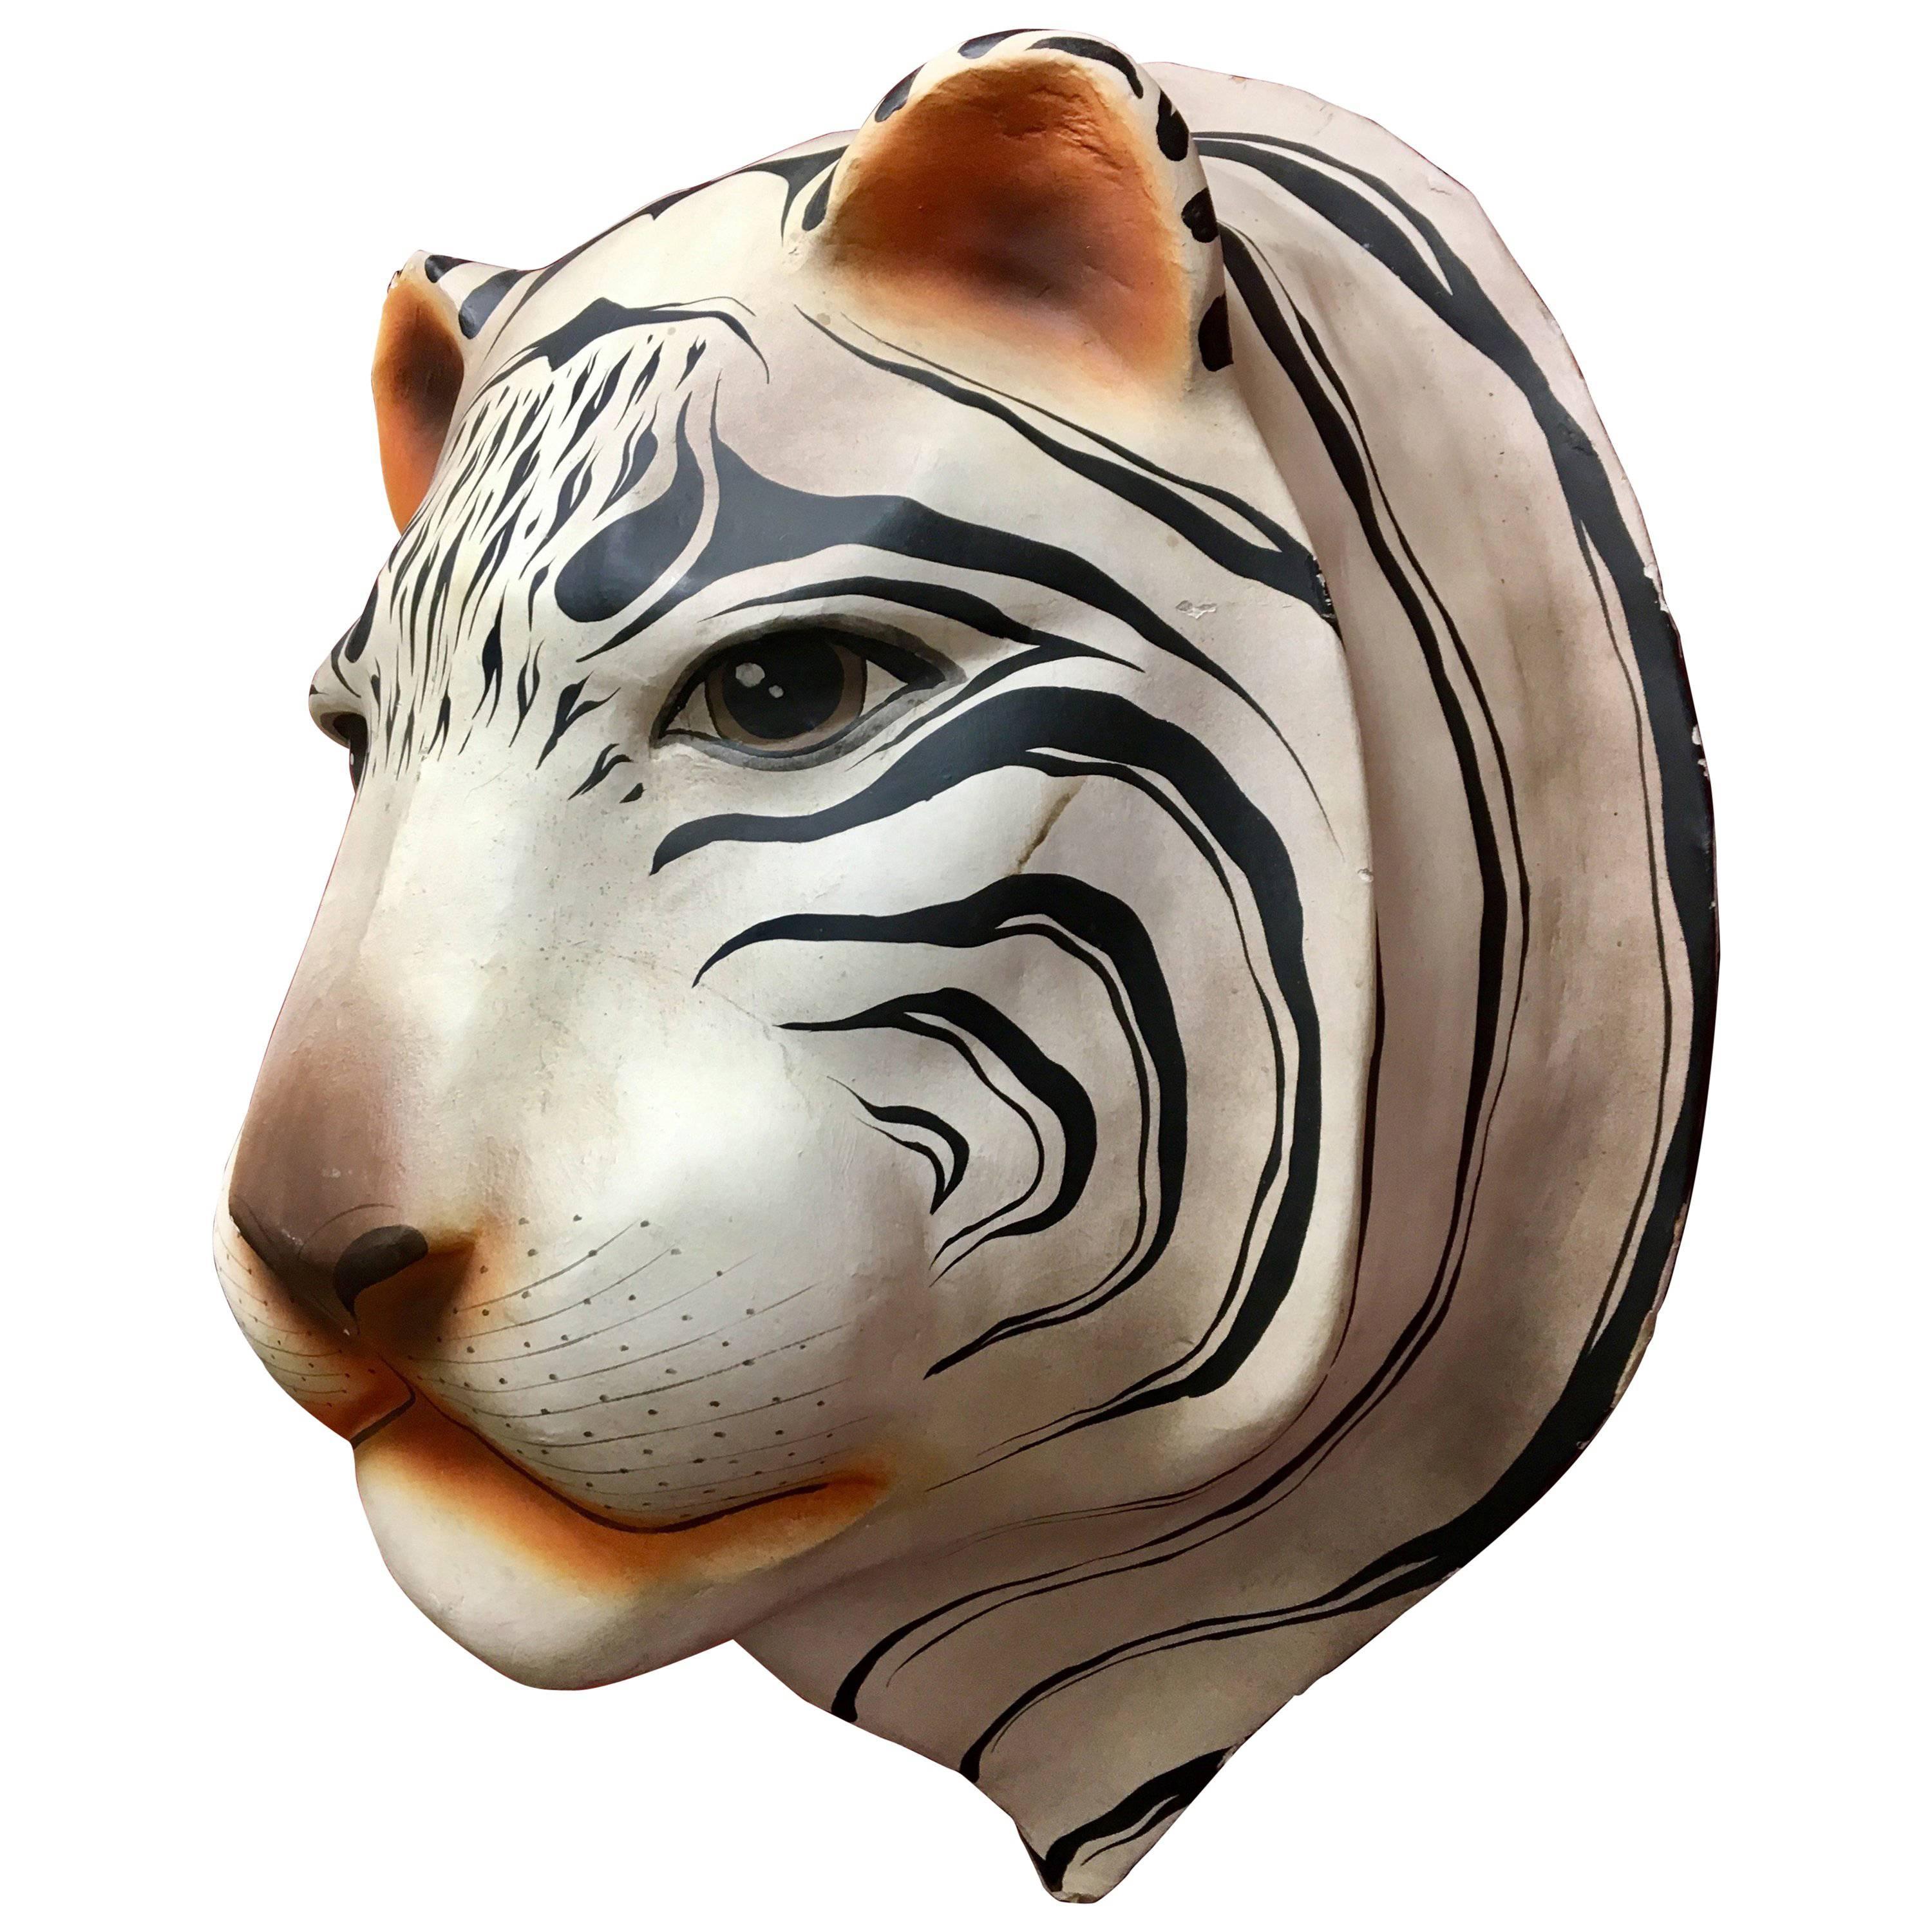 Unique Signed Large White Siberian Tiger Head Made of Paper Mache